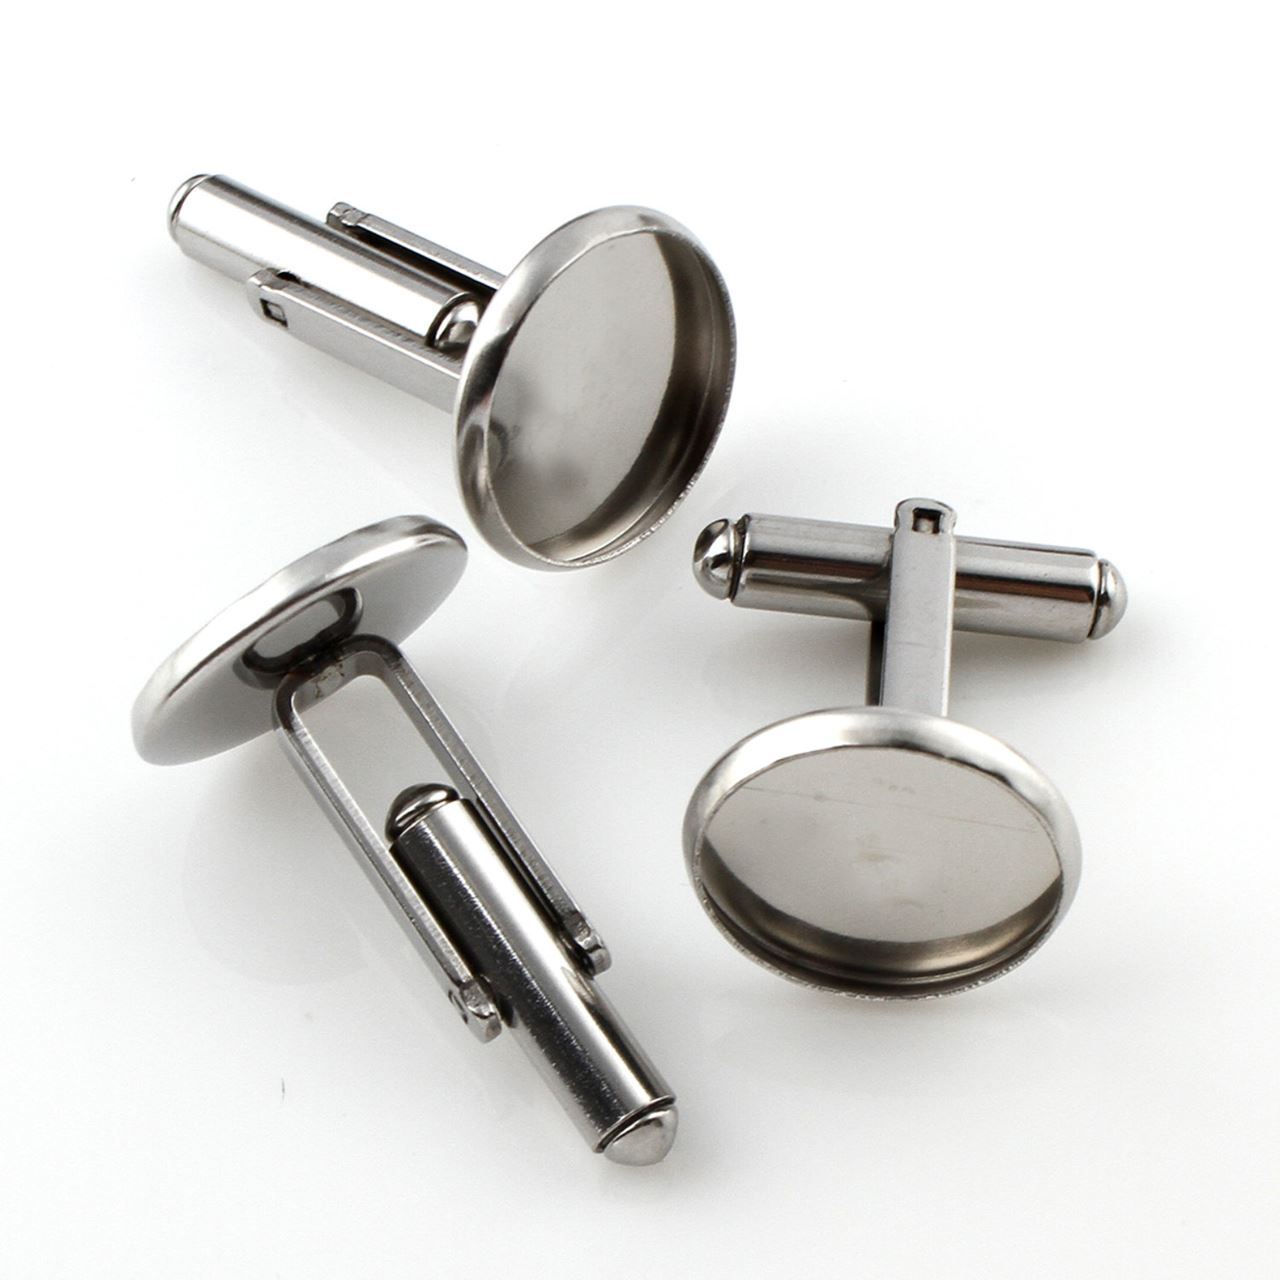 10 x Button cover, imitation nickel-plated brass, 18mm round